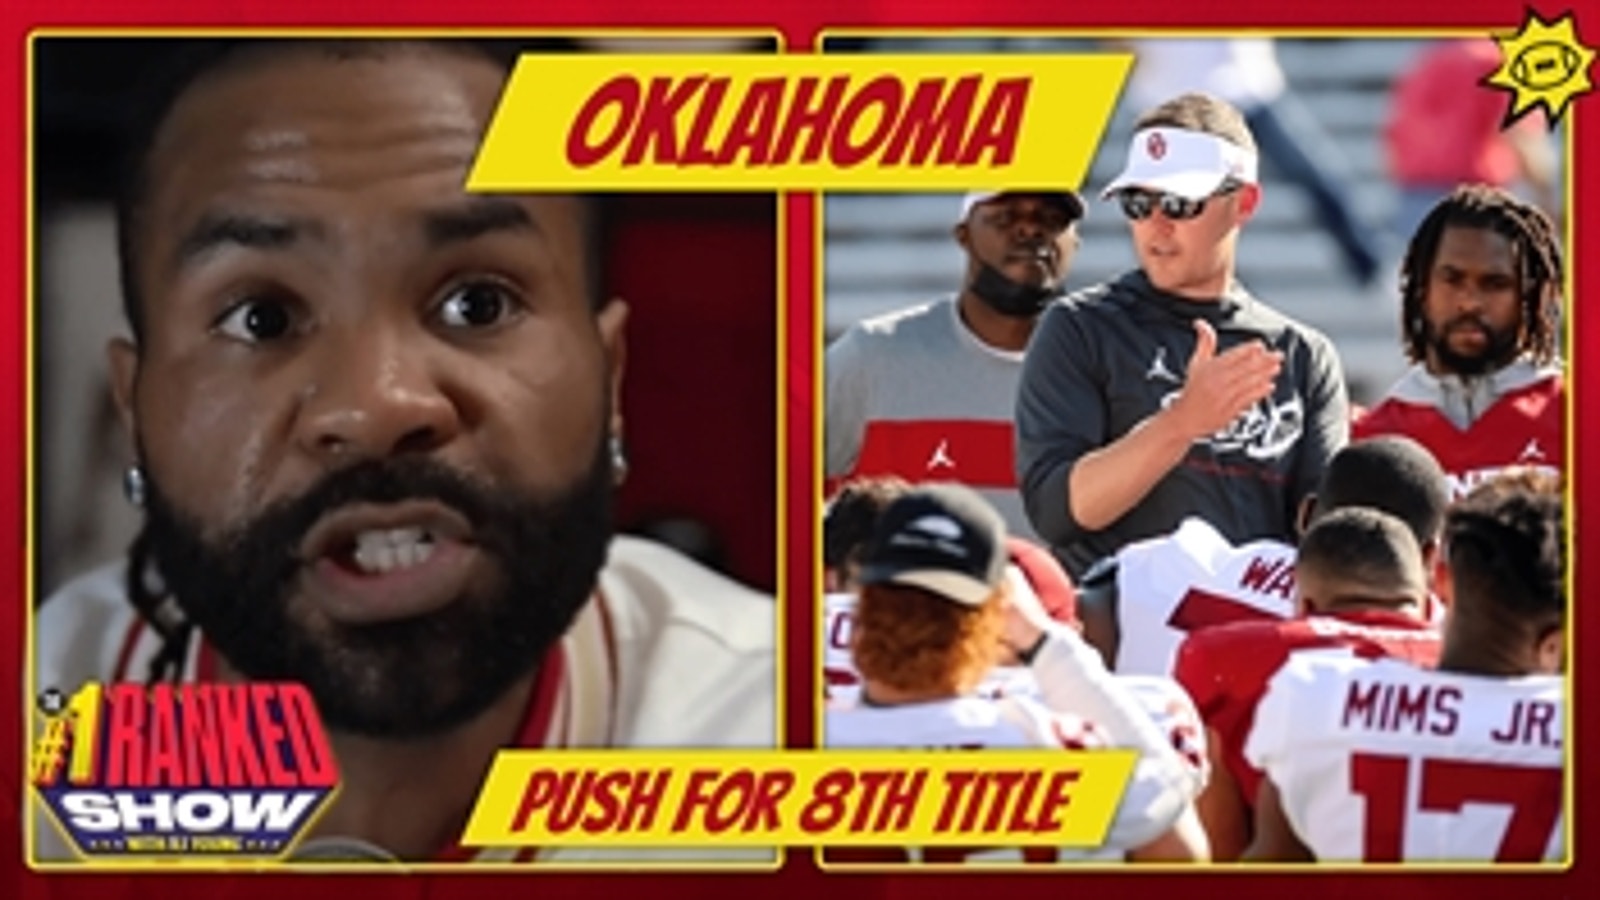 Oklahoma is primed for run at eighth national championship — RJ Young | No. 1 Ranked Show